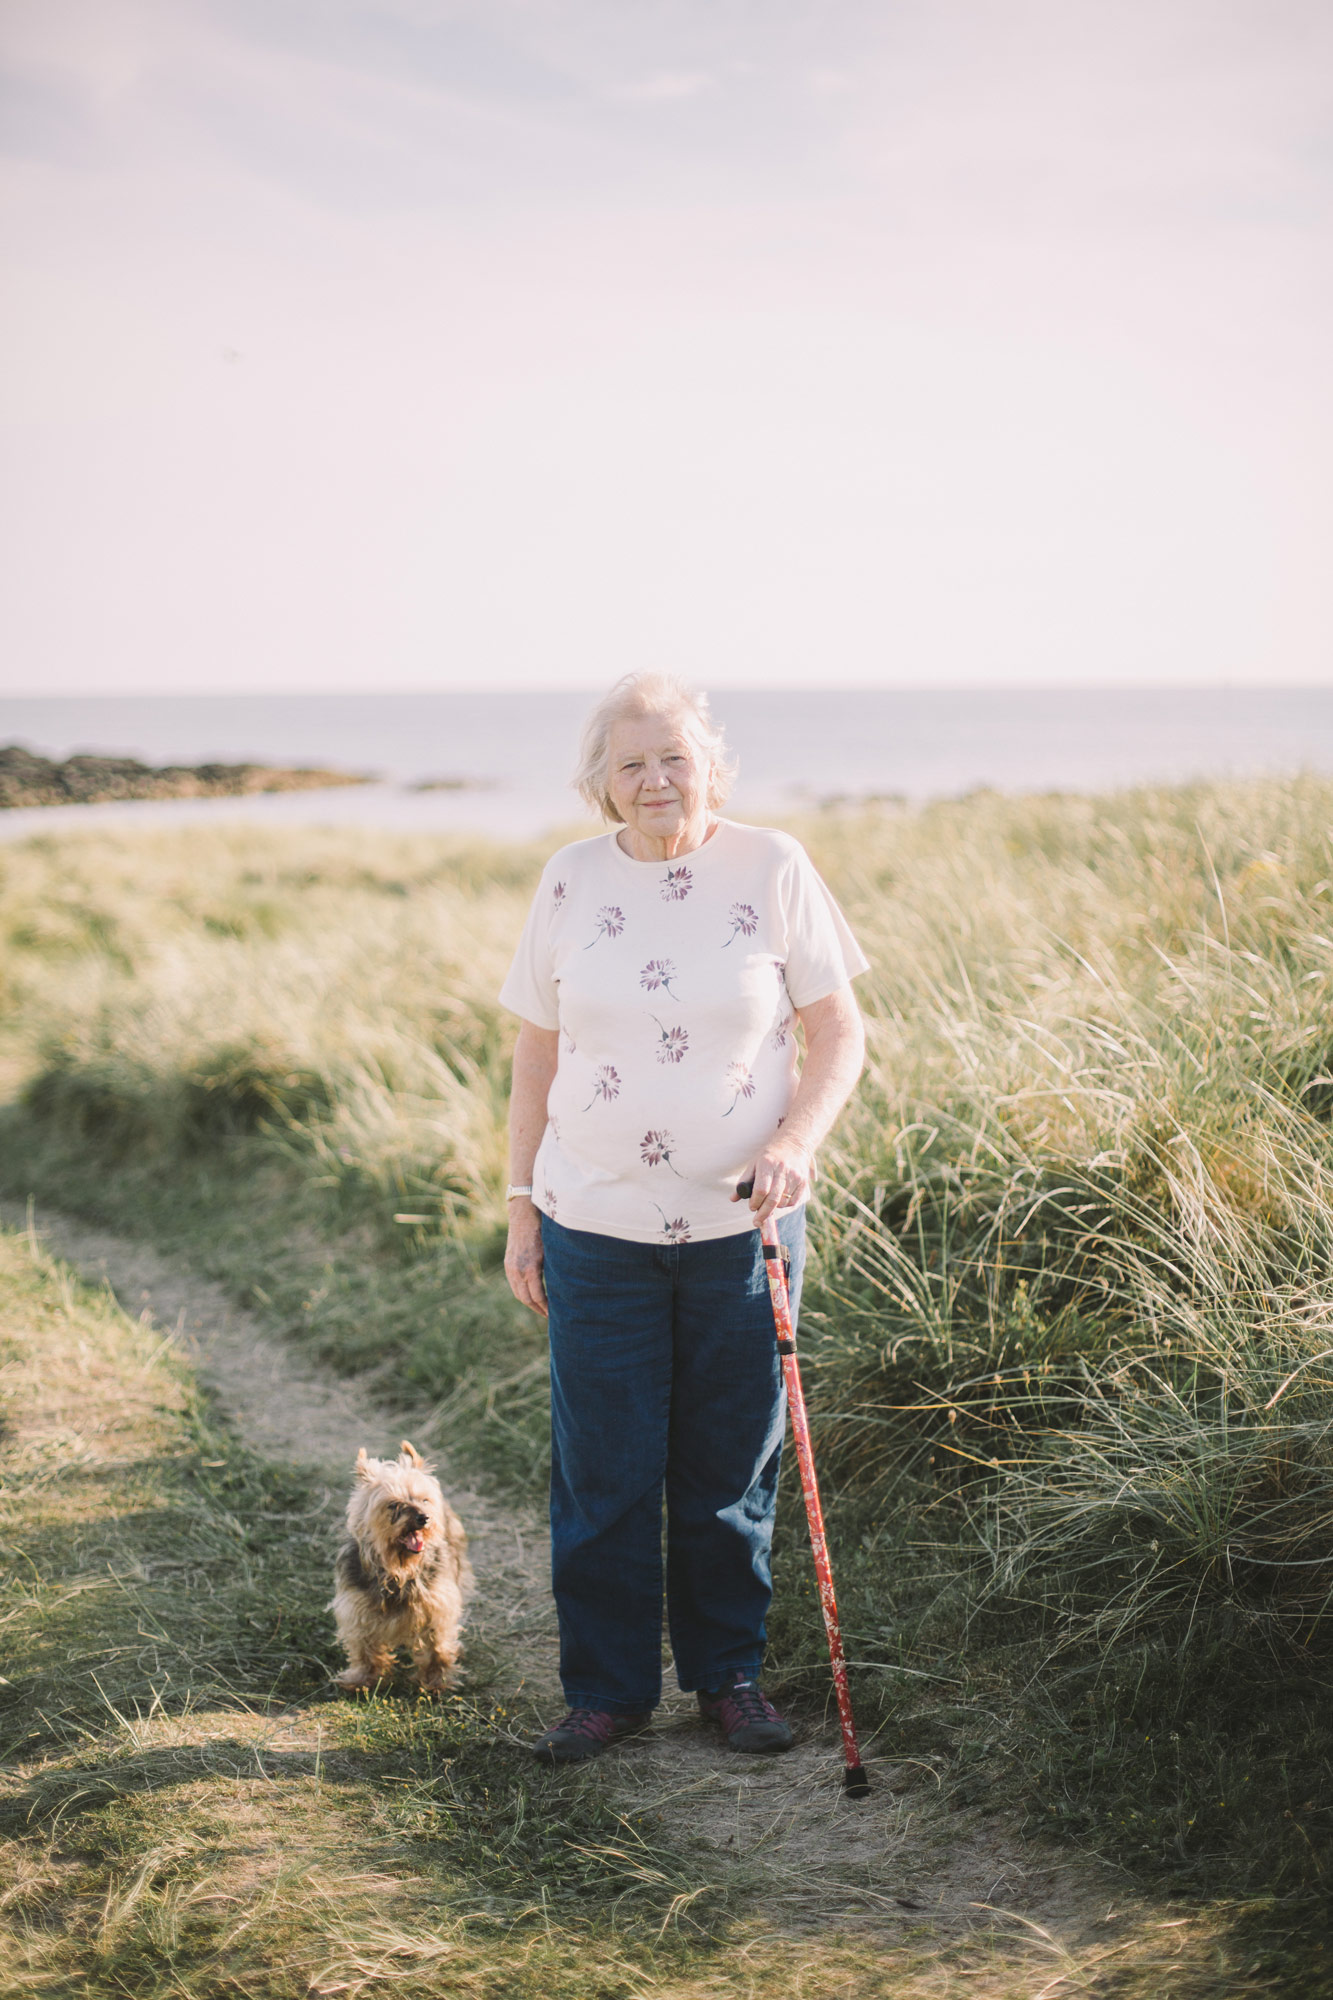 Judith and her dog Jess—inhabitants of Anglesey